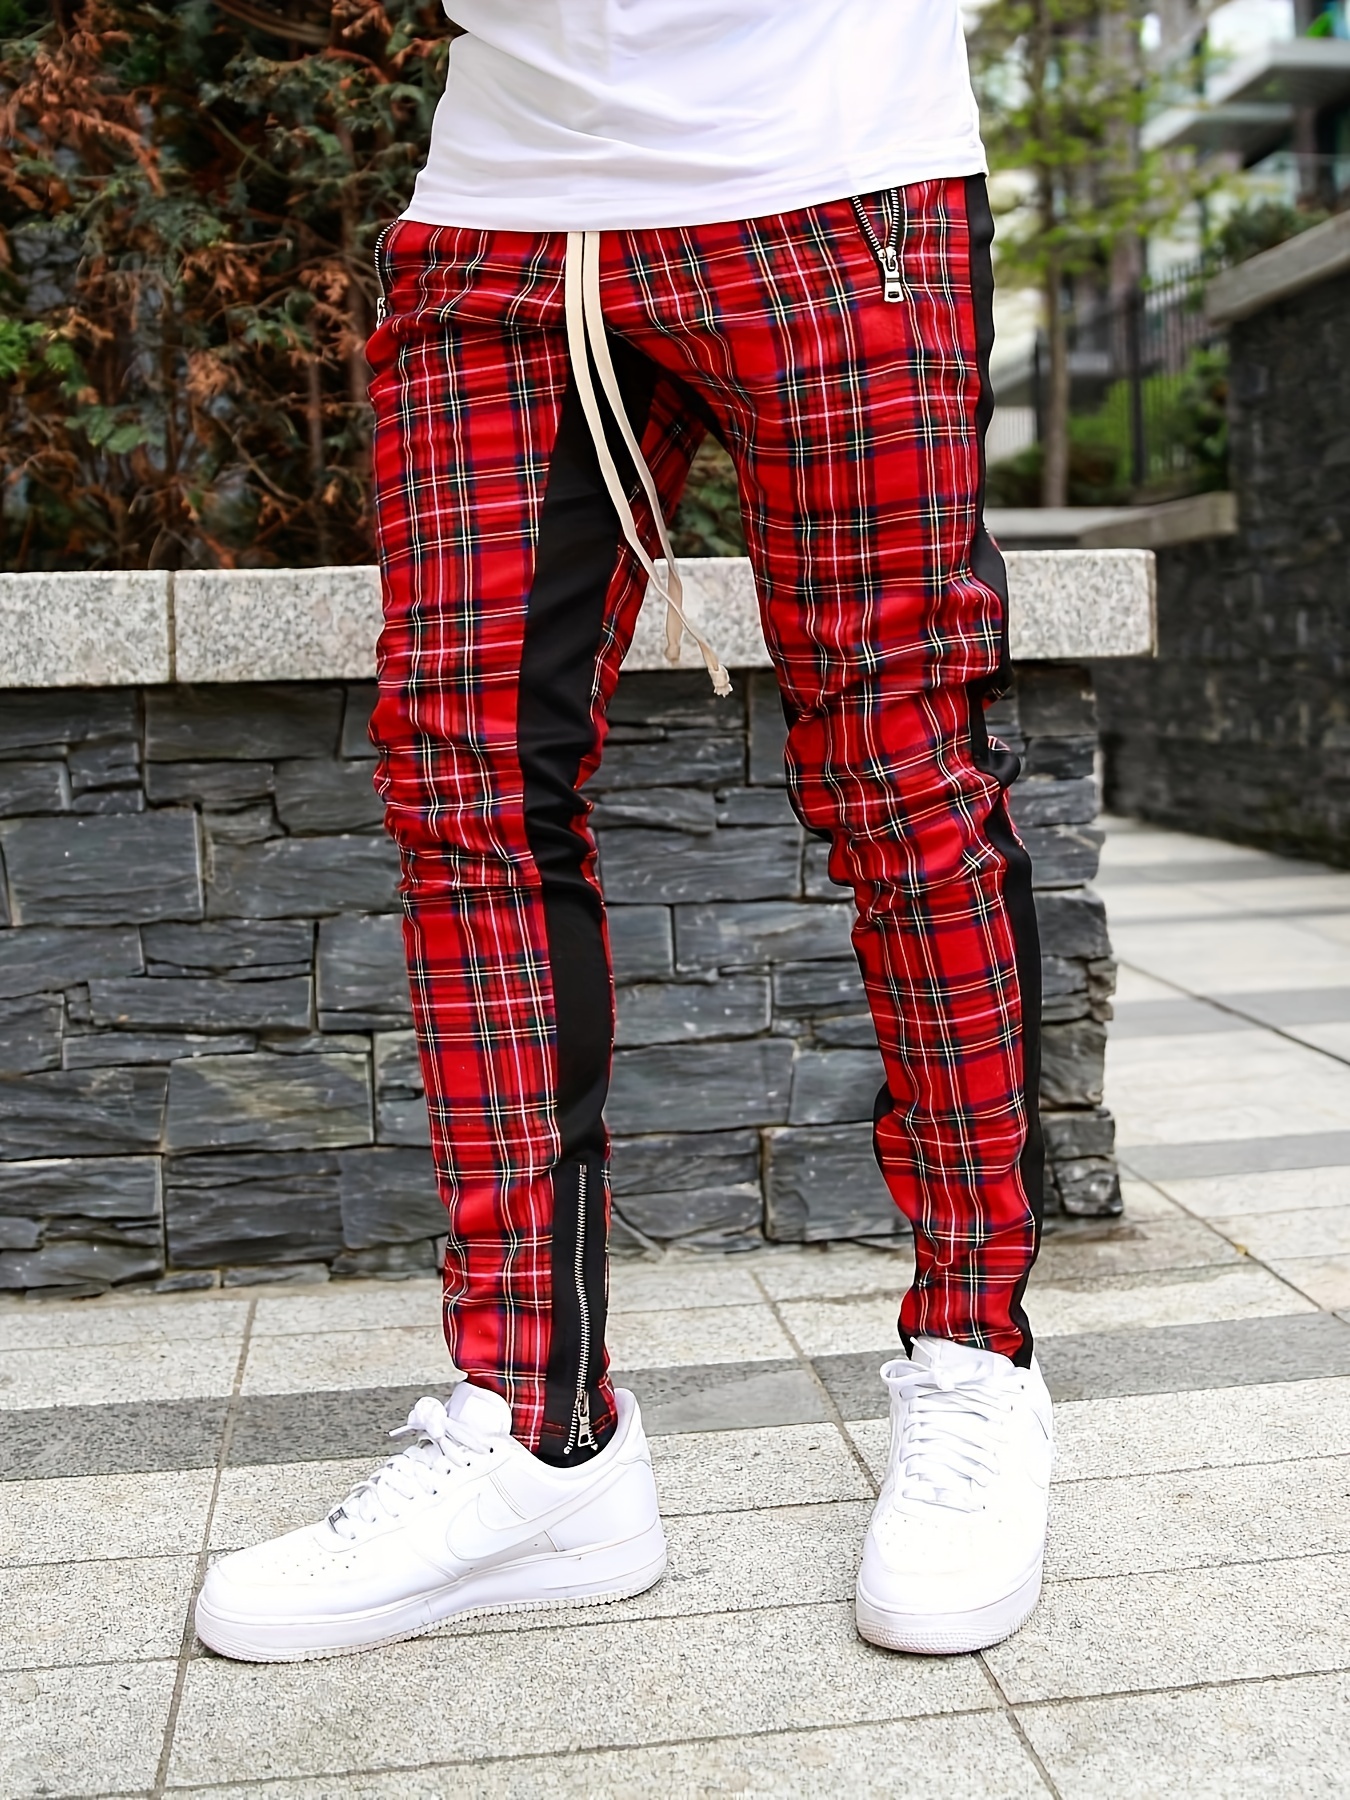 5 Joggers Outfits For Men  Mens joggers outfit, Joggers outfit